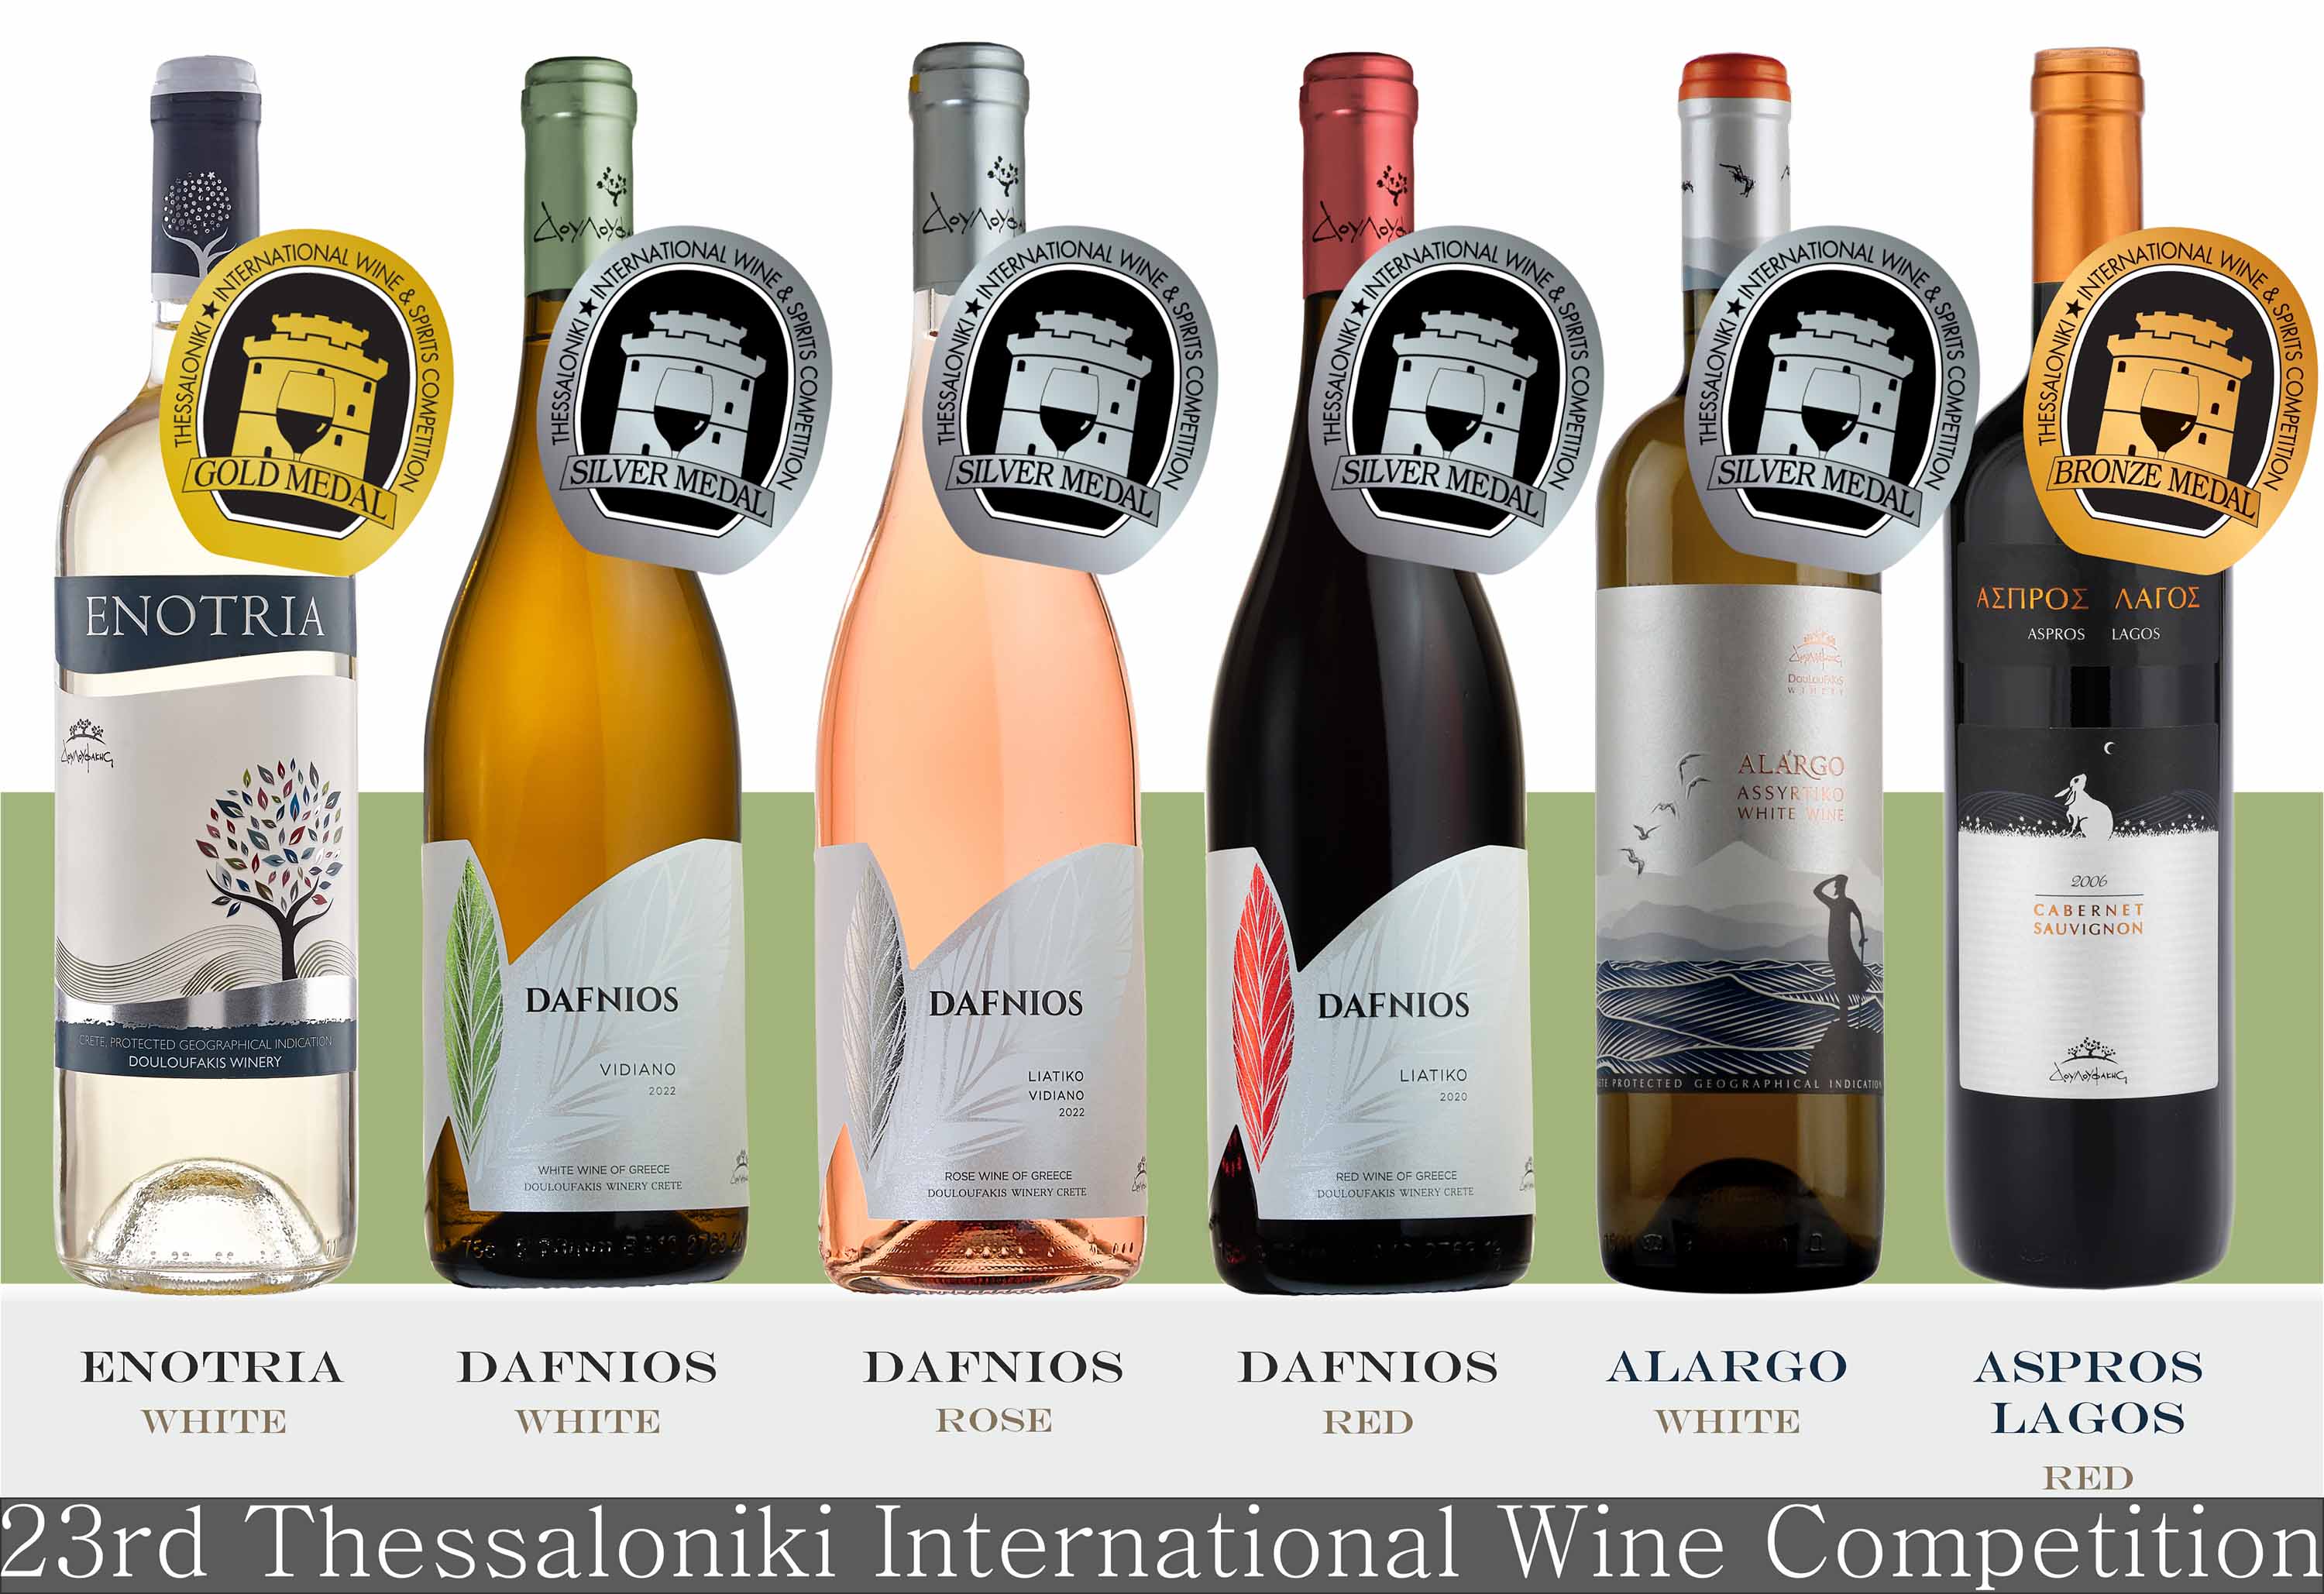 23rd Thessaloniki International Wine Competition awards for Douloufakis wines